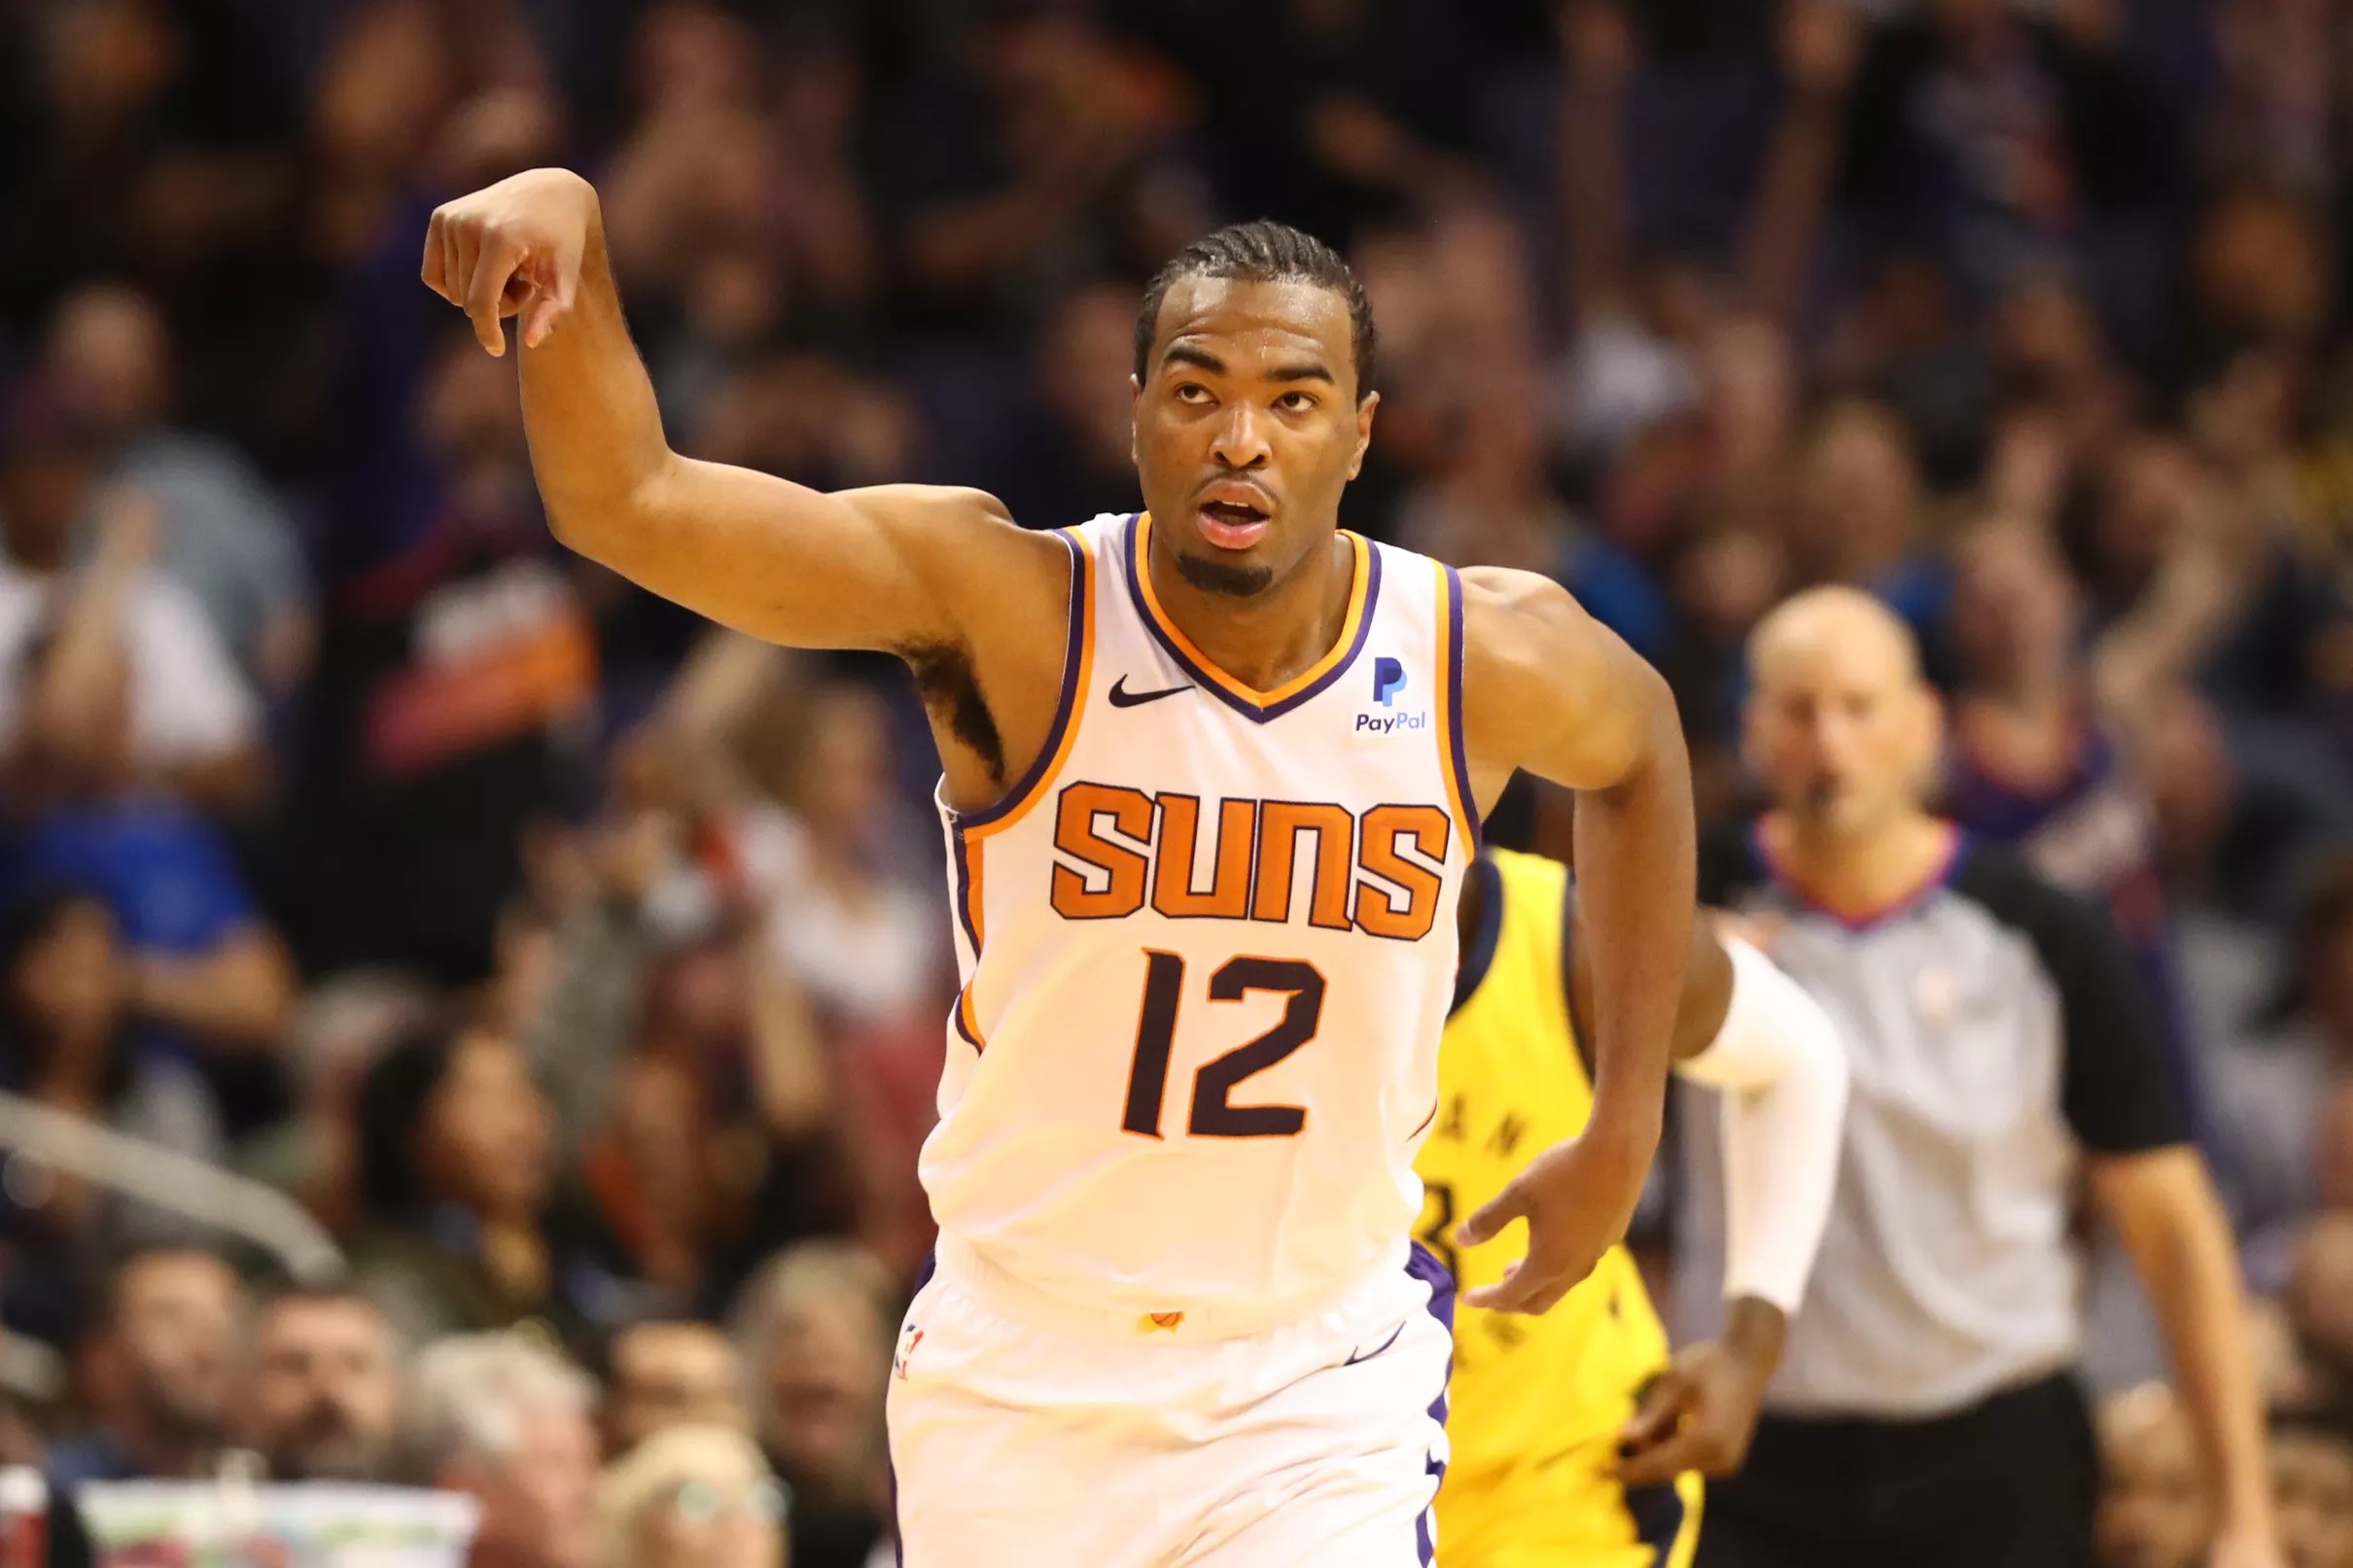 Suns’ trade chips are truly eye of the beholder